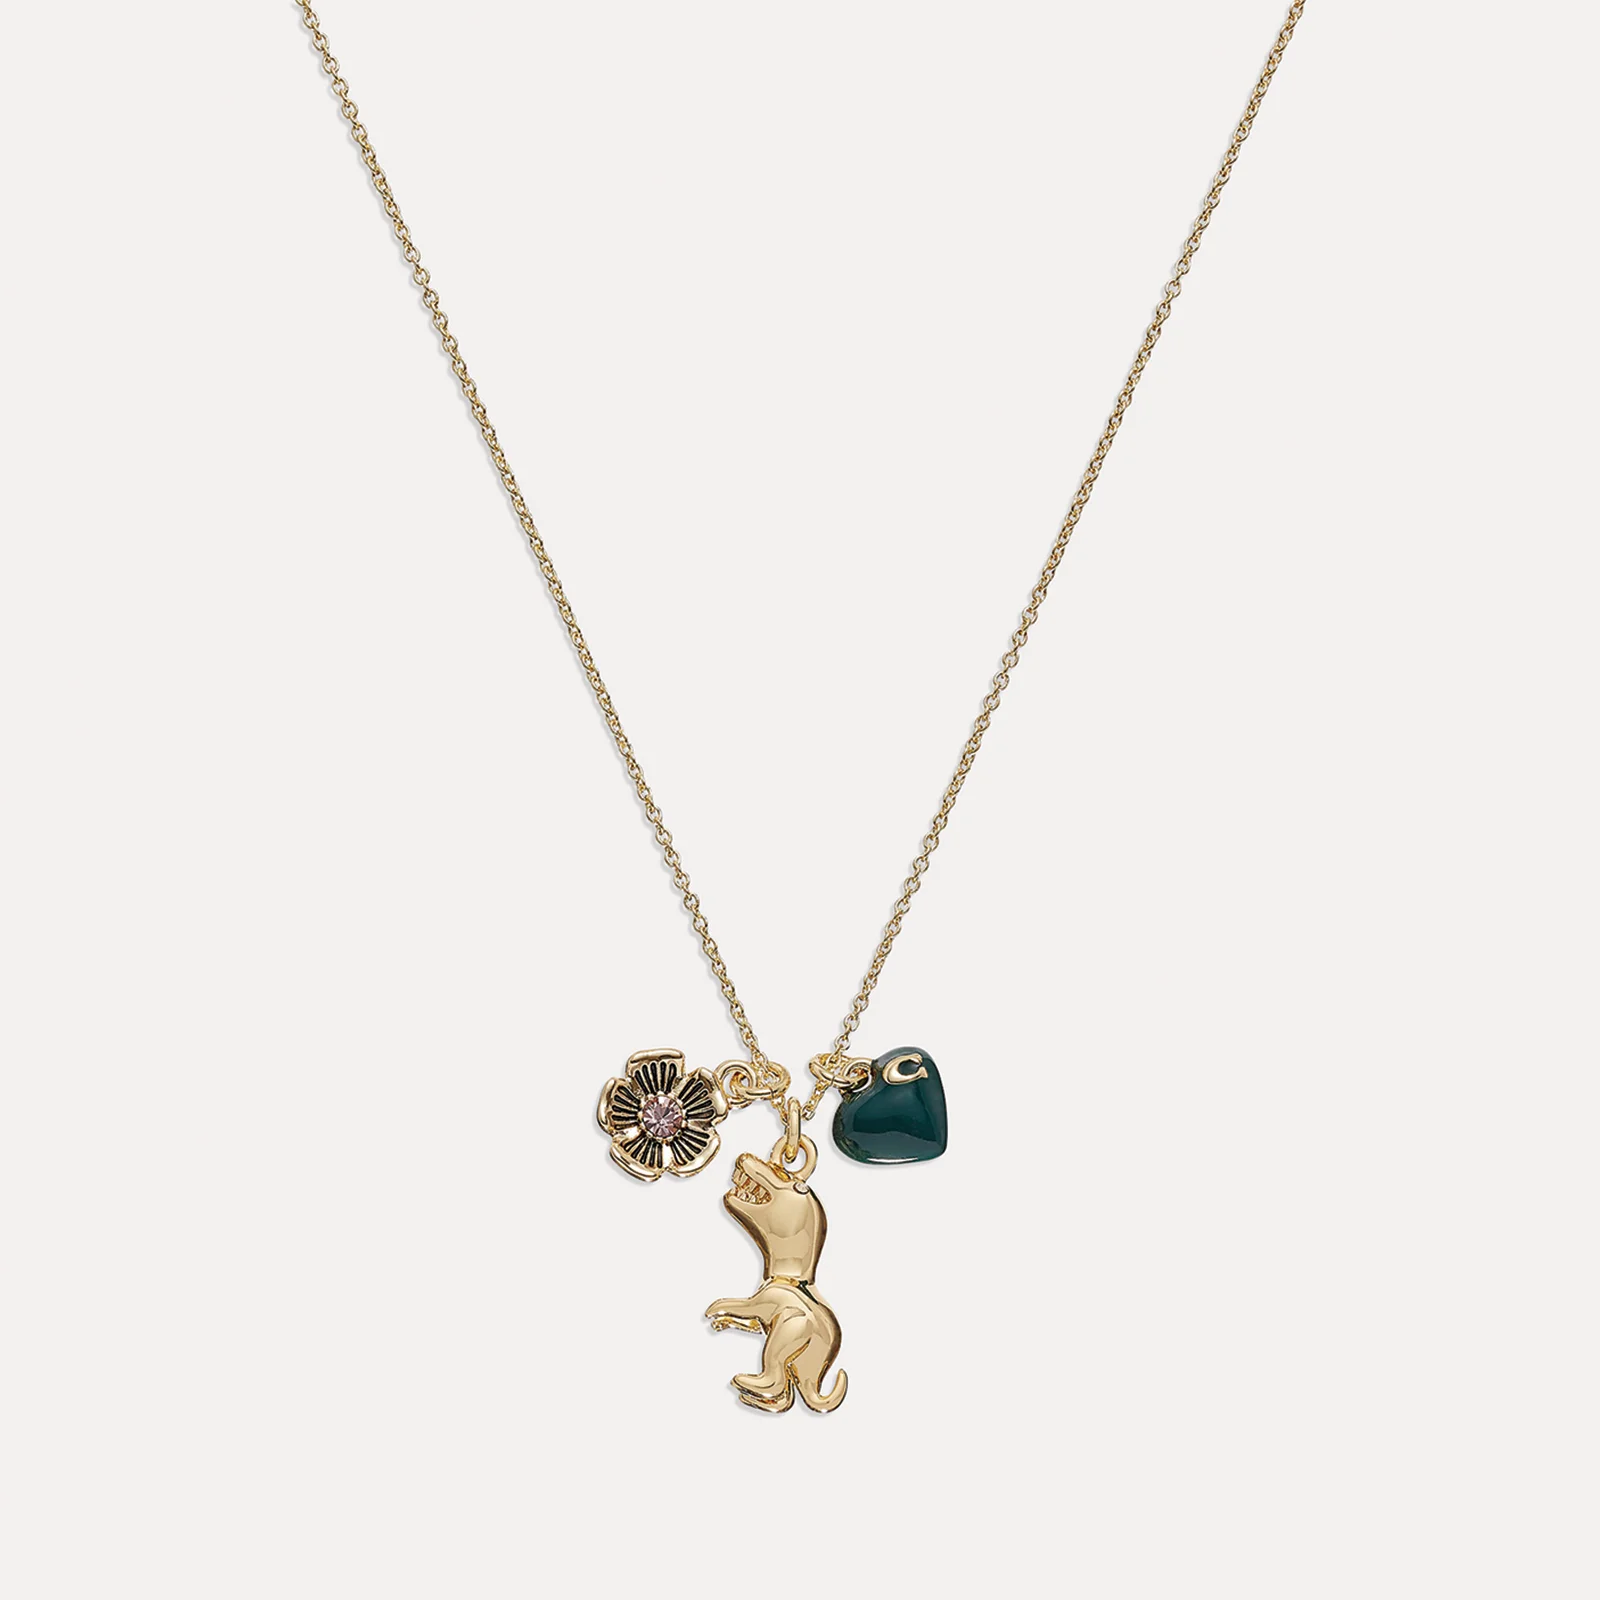 Coach Women's Rexy Heart Charm Pendant Necklace - Gold/Green Image 1